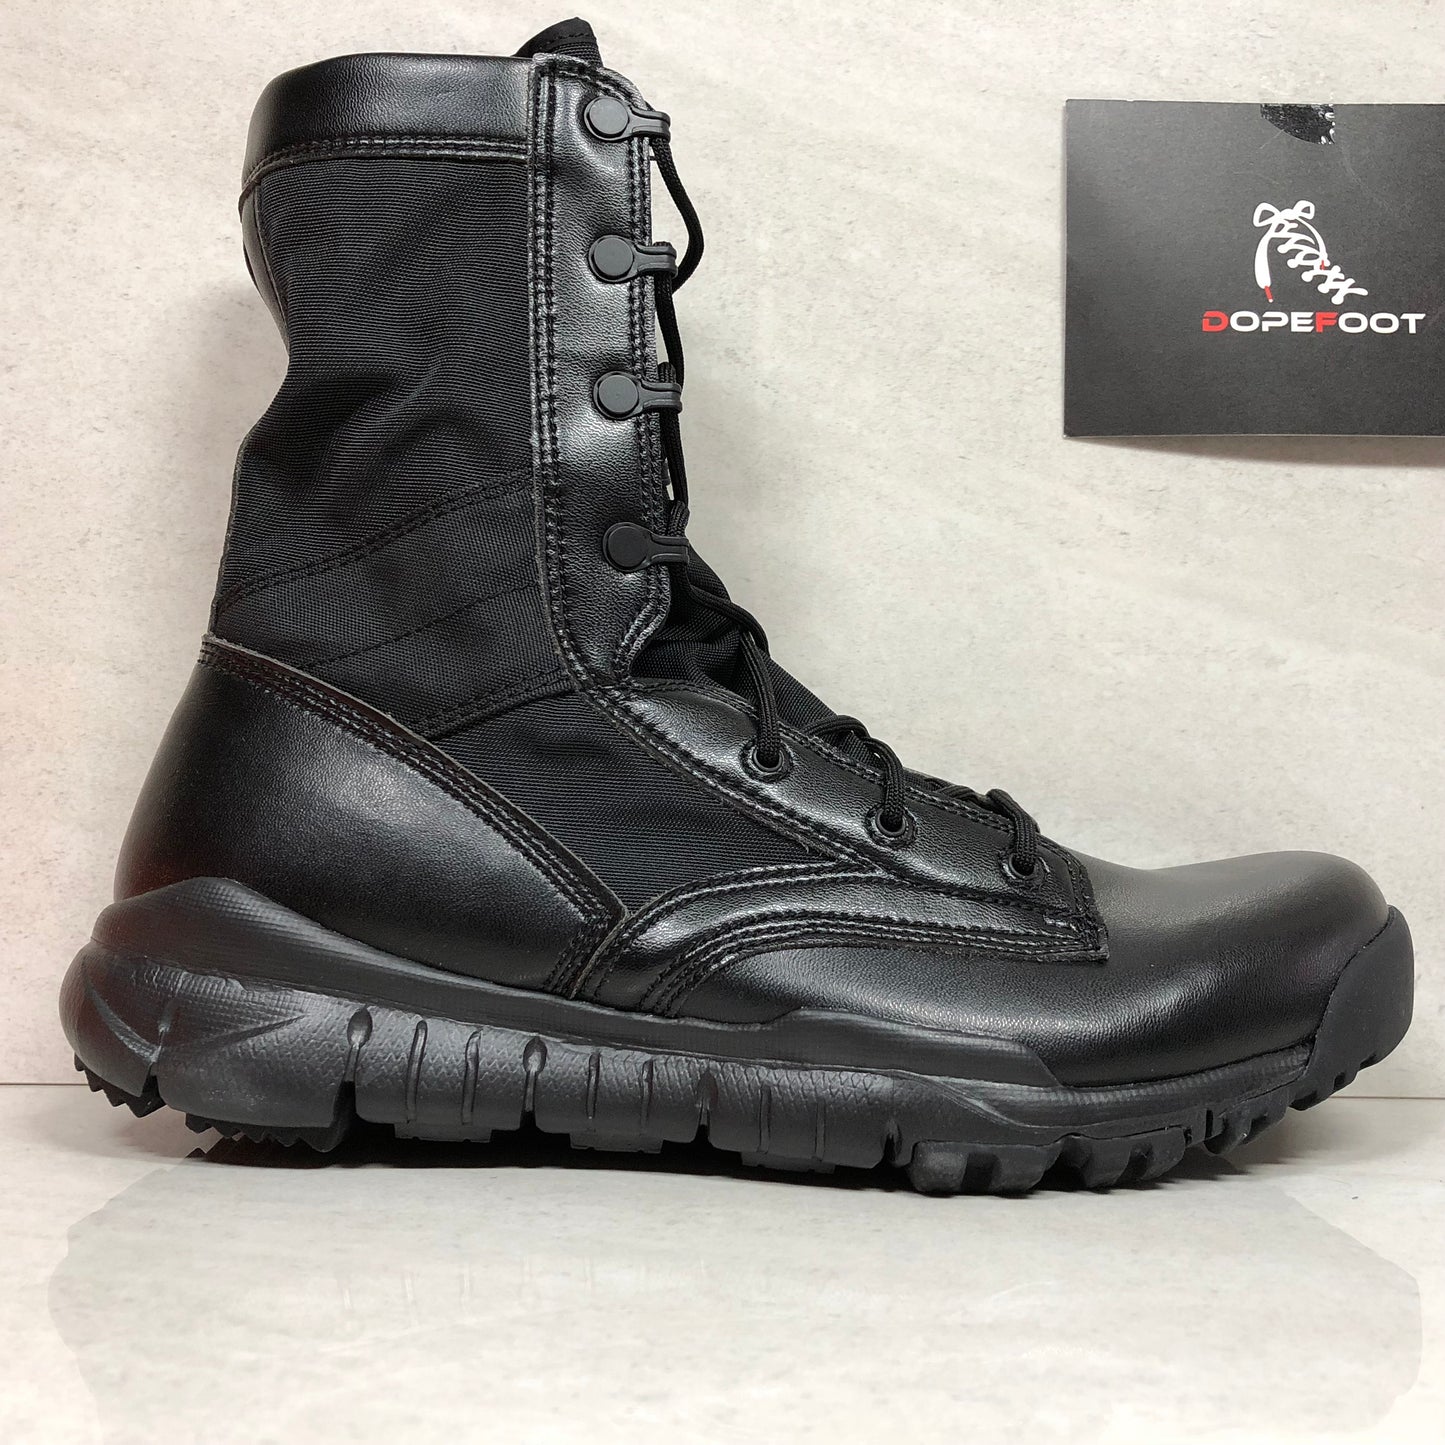 Nike SFB 6" Cuir Noir Special Field Police Tactical Bottes Homme 329798-002